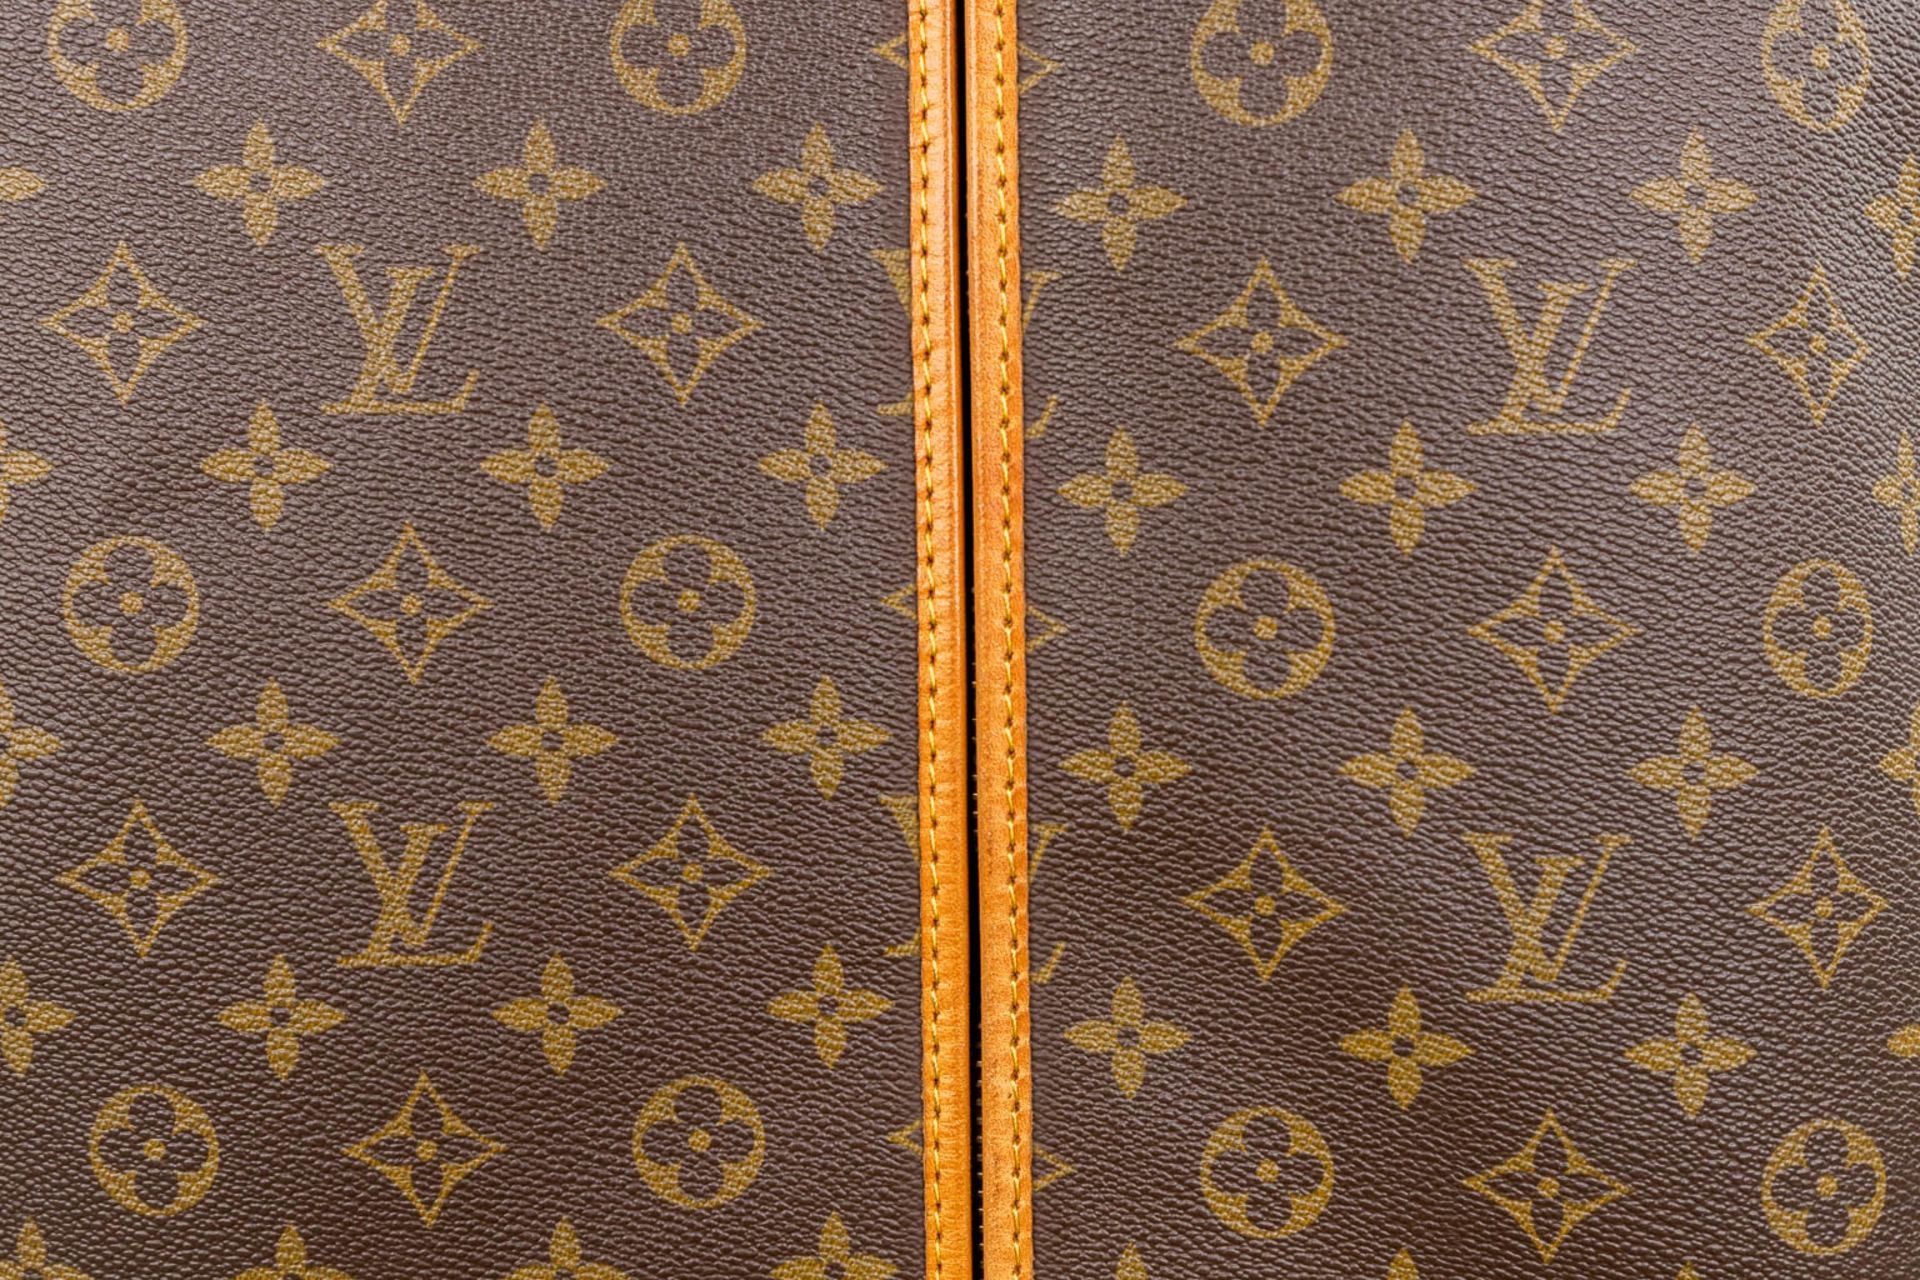 Louis Vuitton, a vintage costume storage bag made of leather. (H:123 cm) - Image 8 of 18